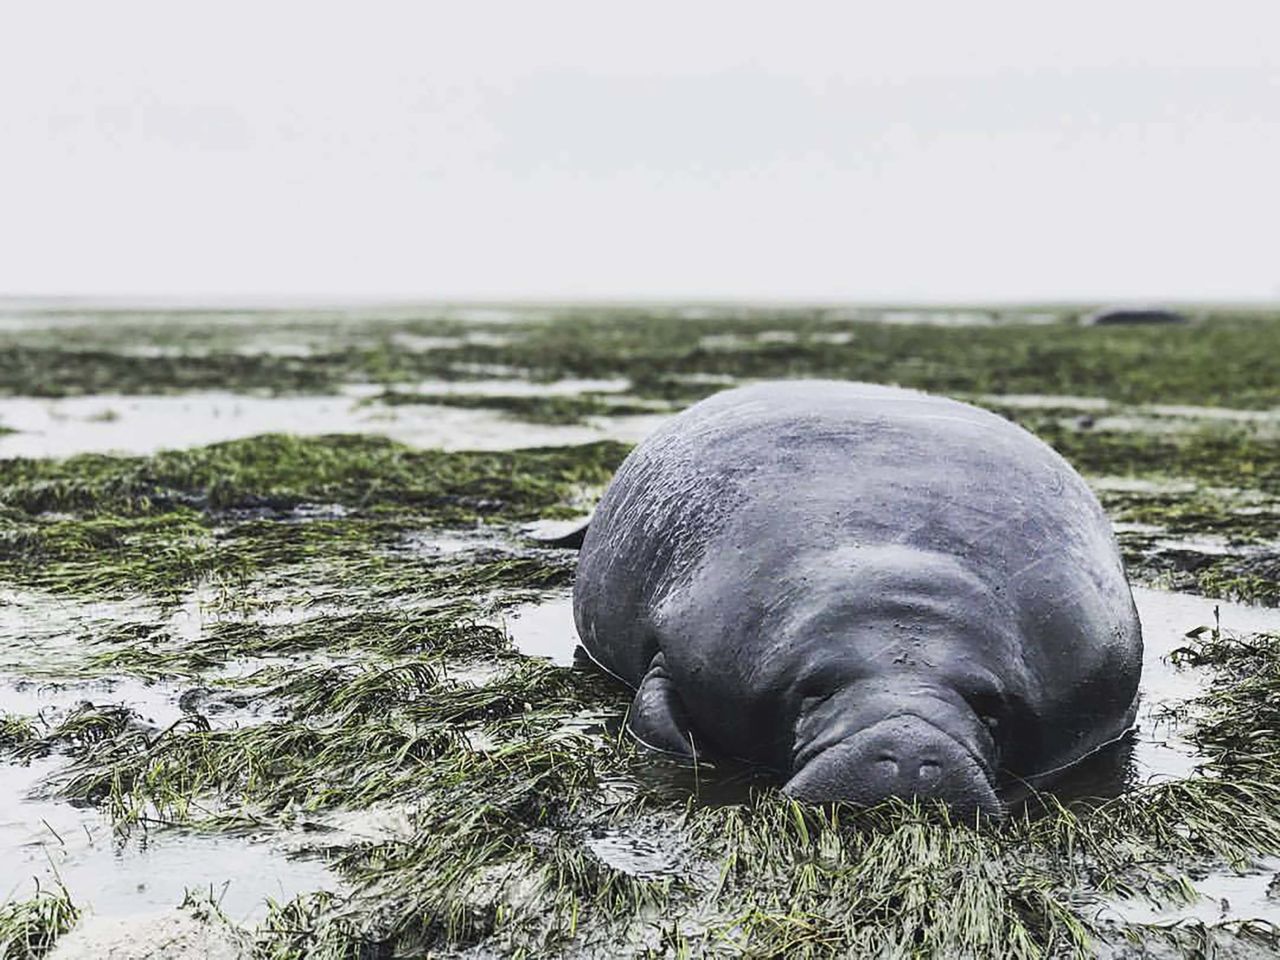 A manatee lies stranded September 10 after waters receded during Irma's approach in Manatee County, Florida.